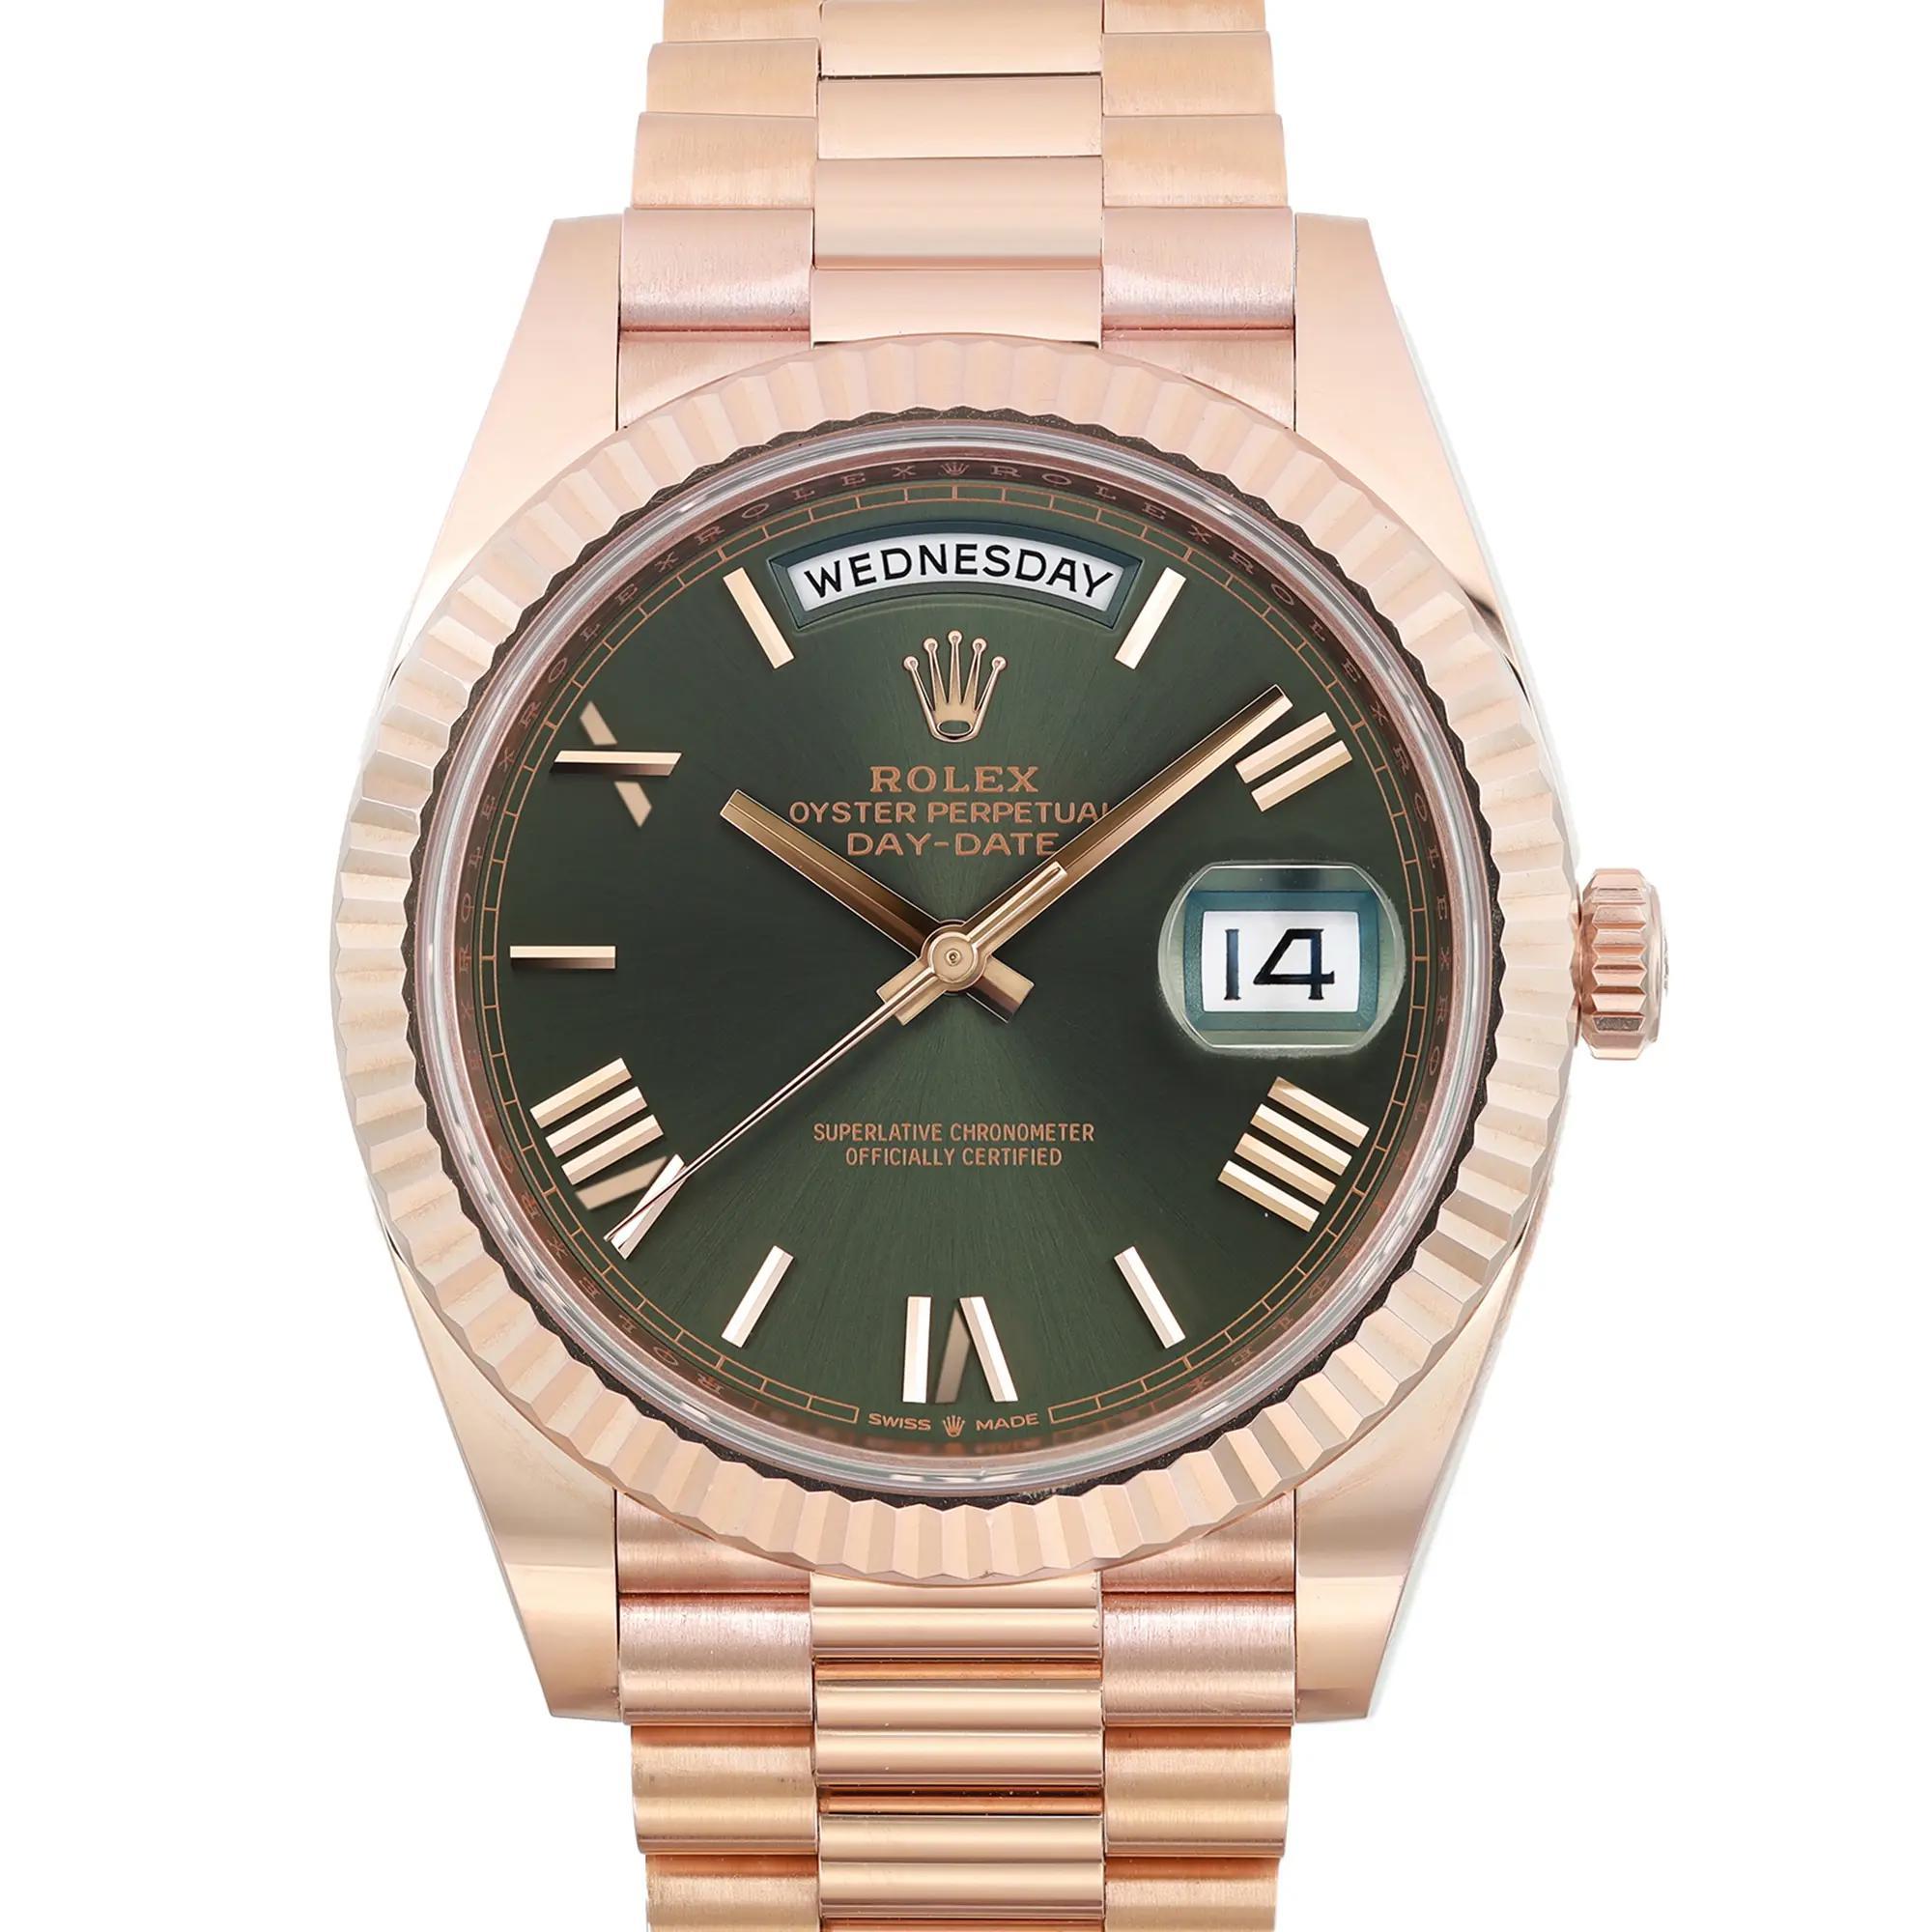 Beautiful Pre-owned in mint condition. Comes with the original box and papers. 3-year warranty. 


General Information

Brand: Rolex
Type: Wristwatch
Department: Men
Model Number: 228235 ogrp
Year Manufactured: 2019
Style: Luxury
Vintage: